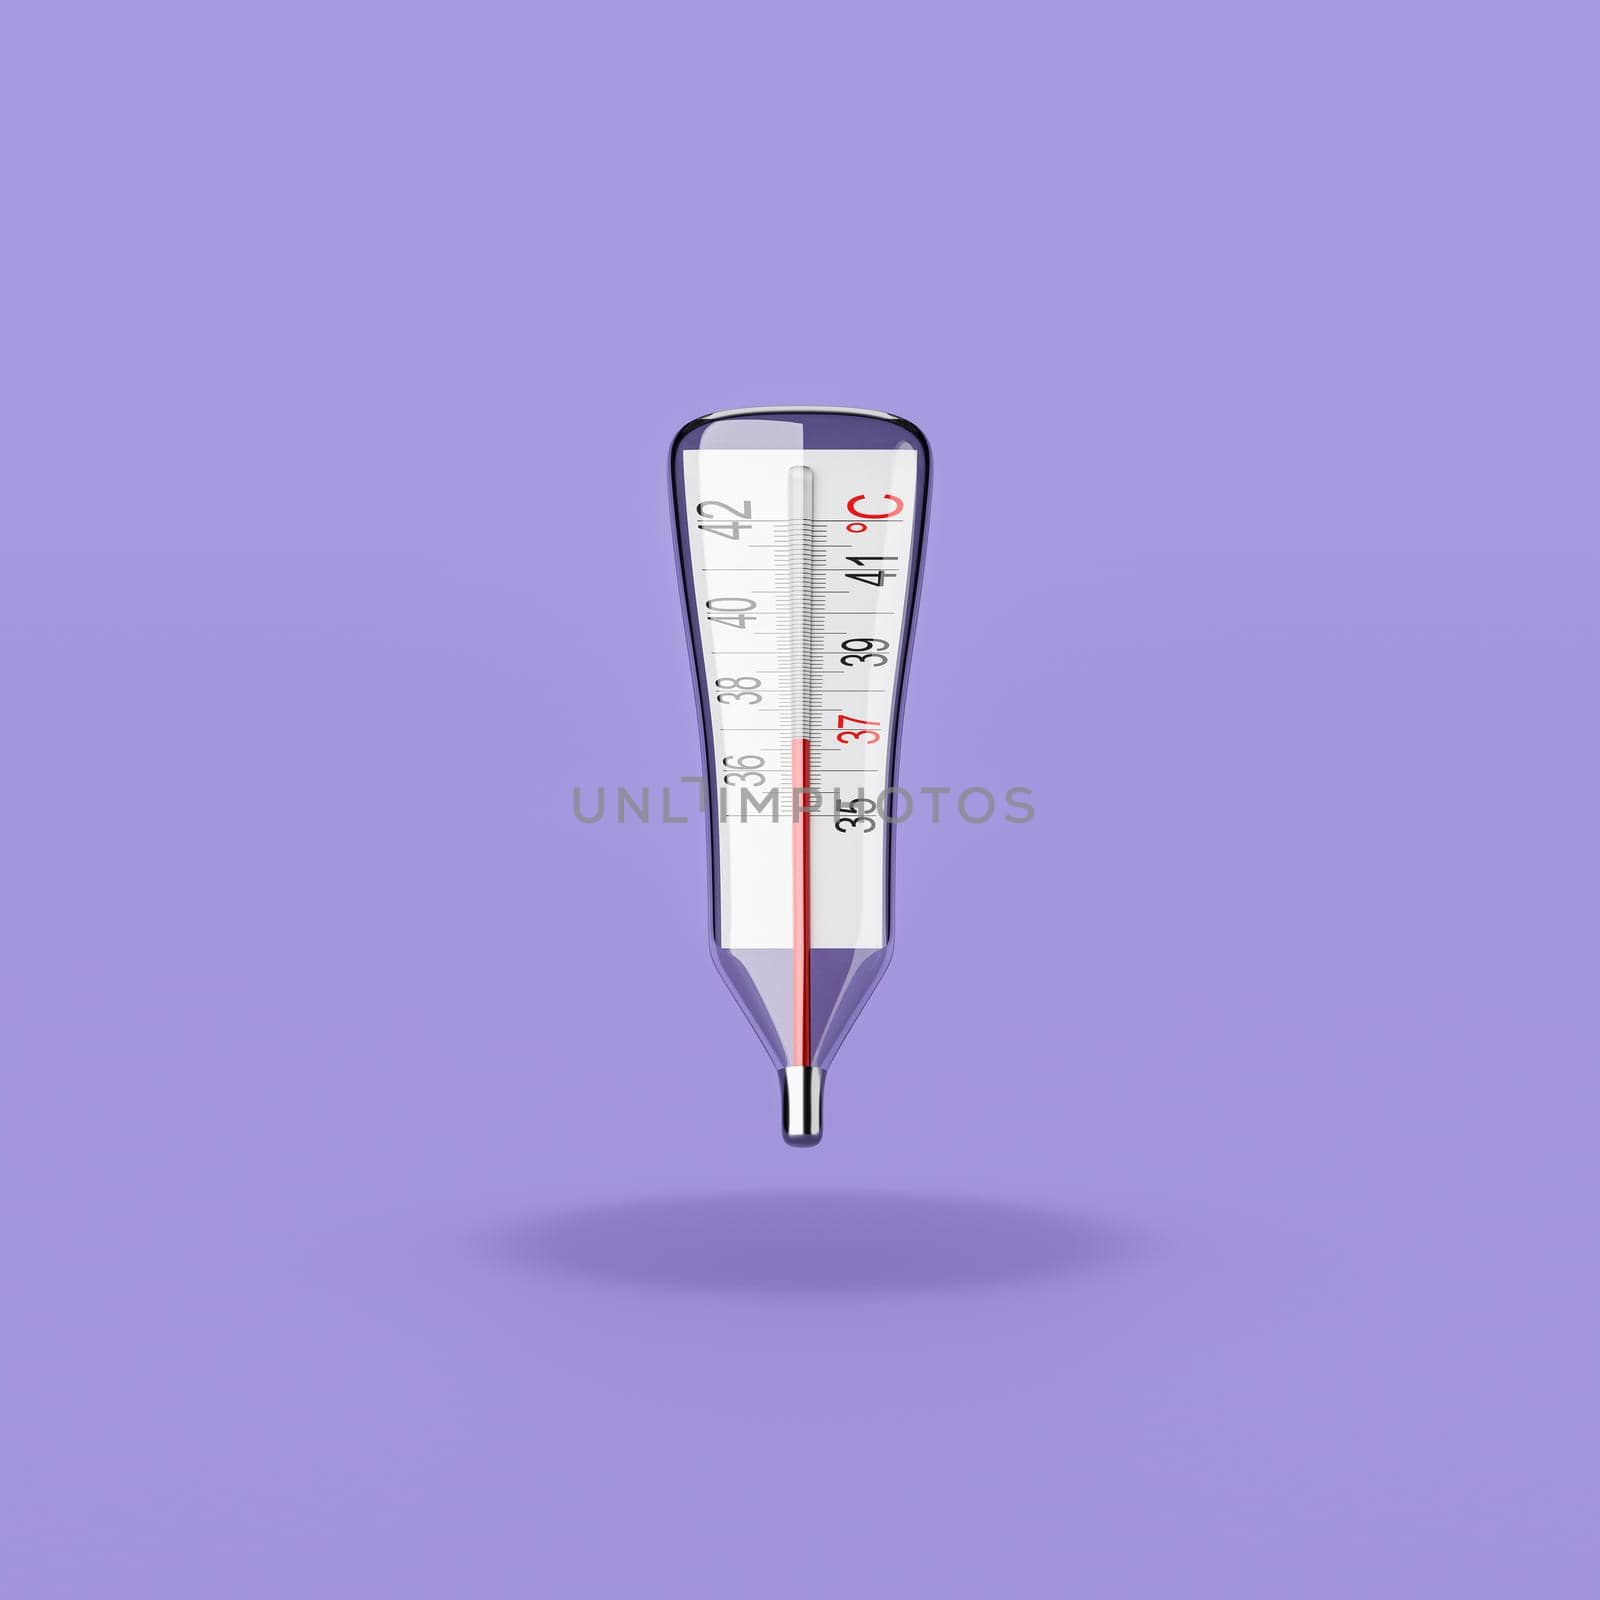 Clinical Thermometer on Purple Background by make